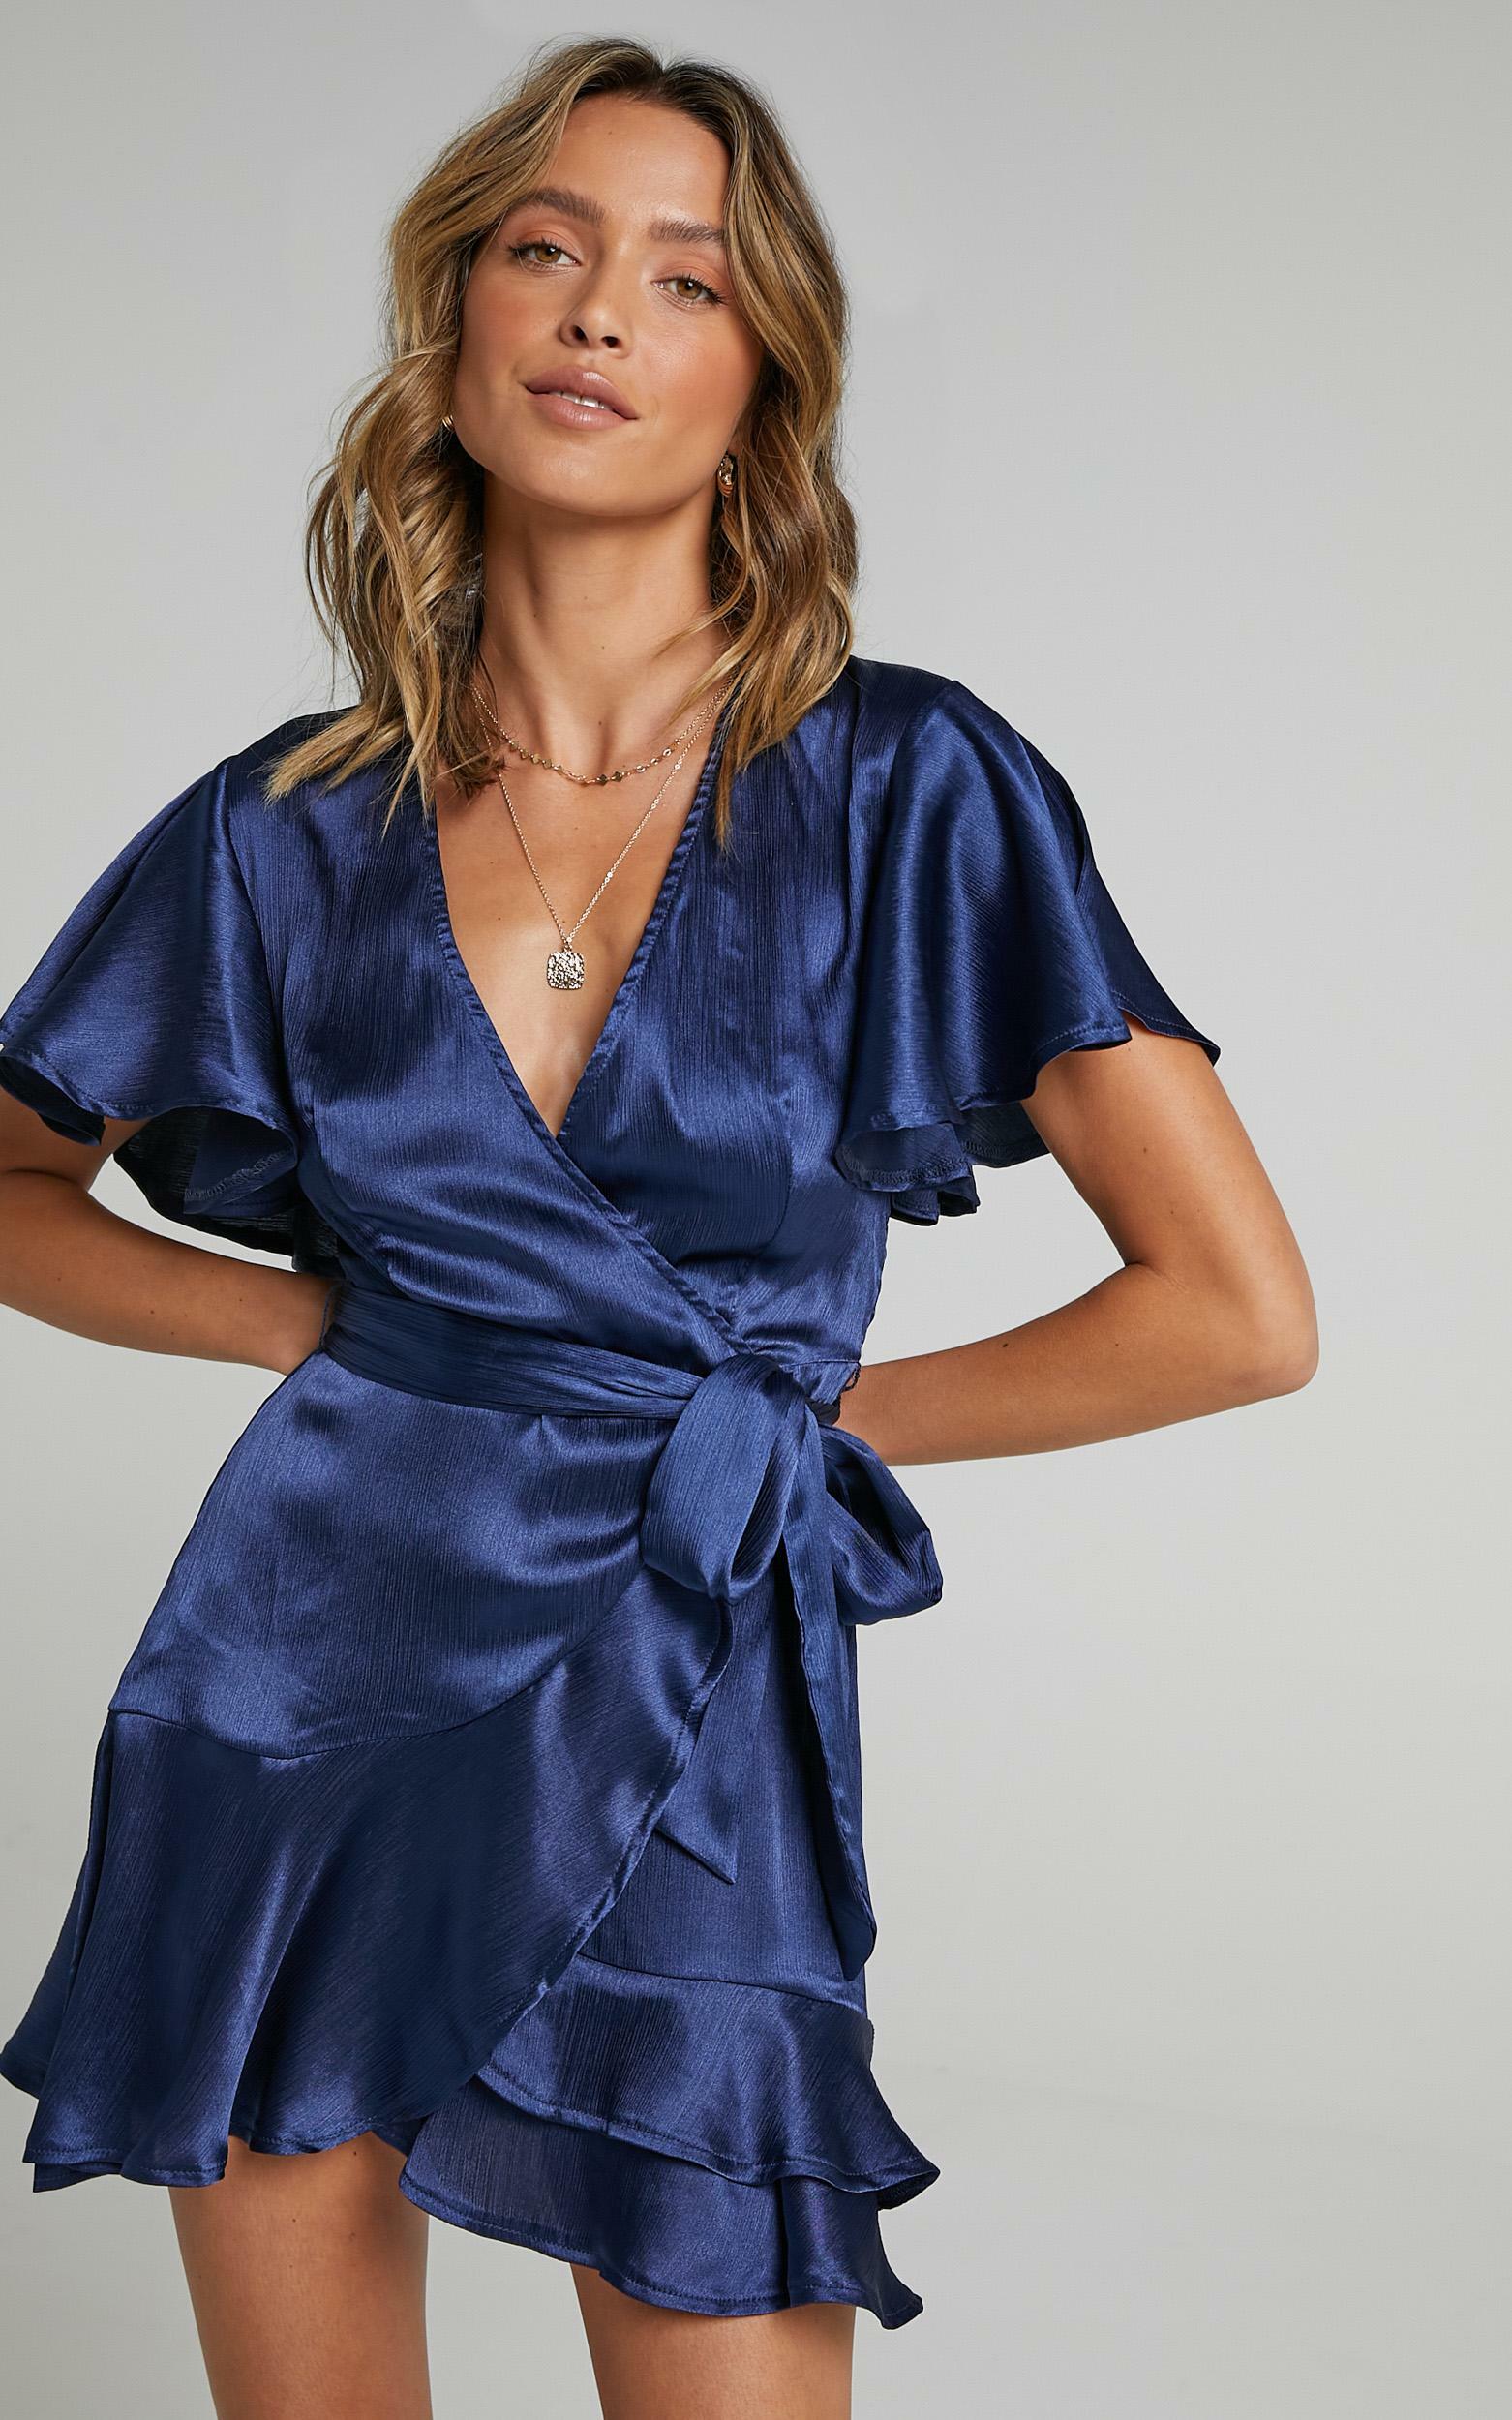 All I Want To Be Ruffle Mini Dress in Navy Satin - 04, NVY3, hi-res image number null